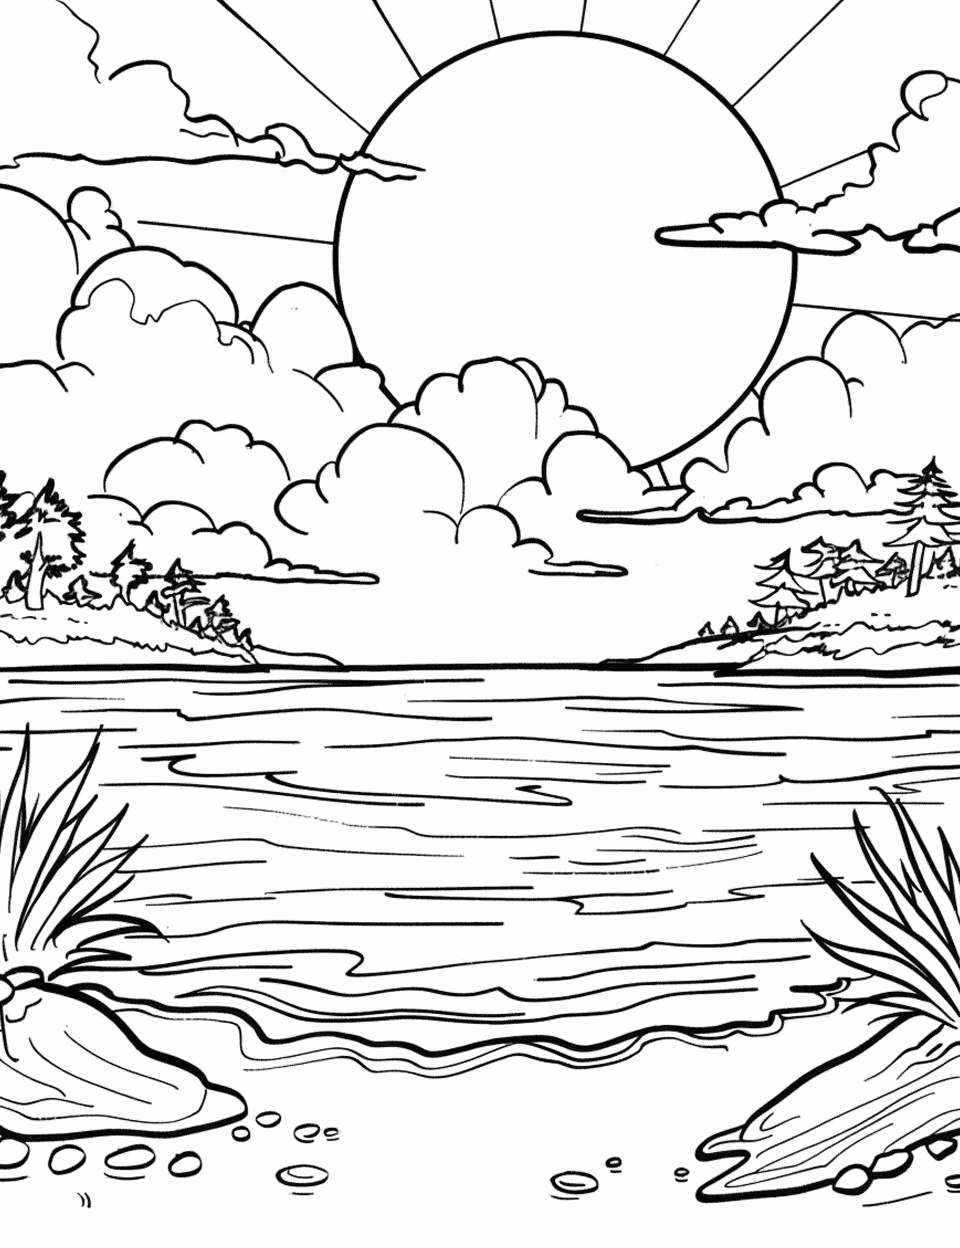 Sunset at the Lake Sun Coloring Page - A serene scene of the sun setting over a calm lake.